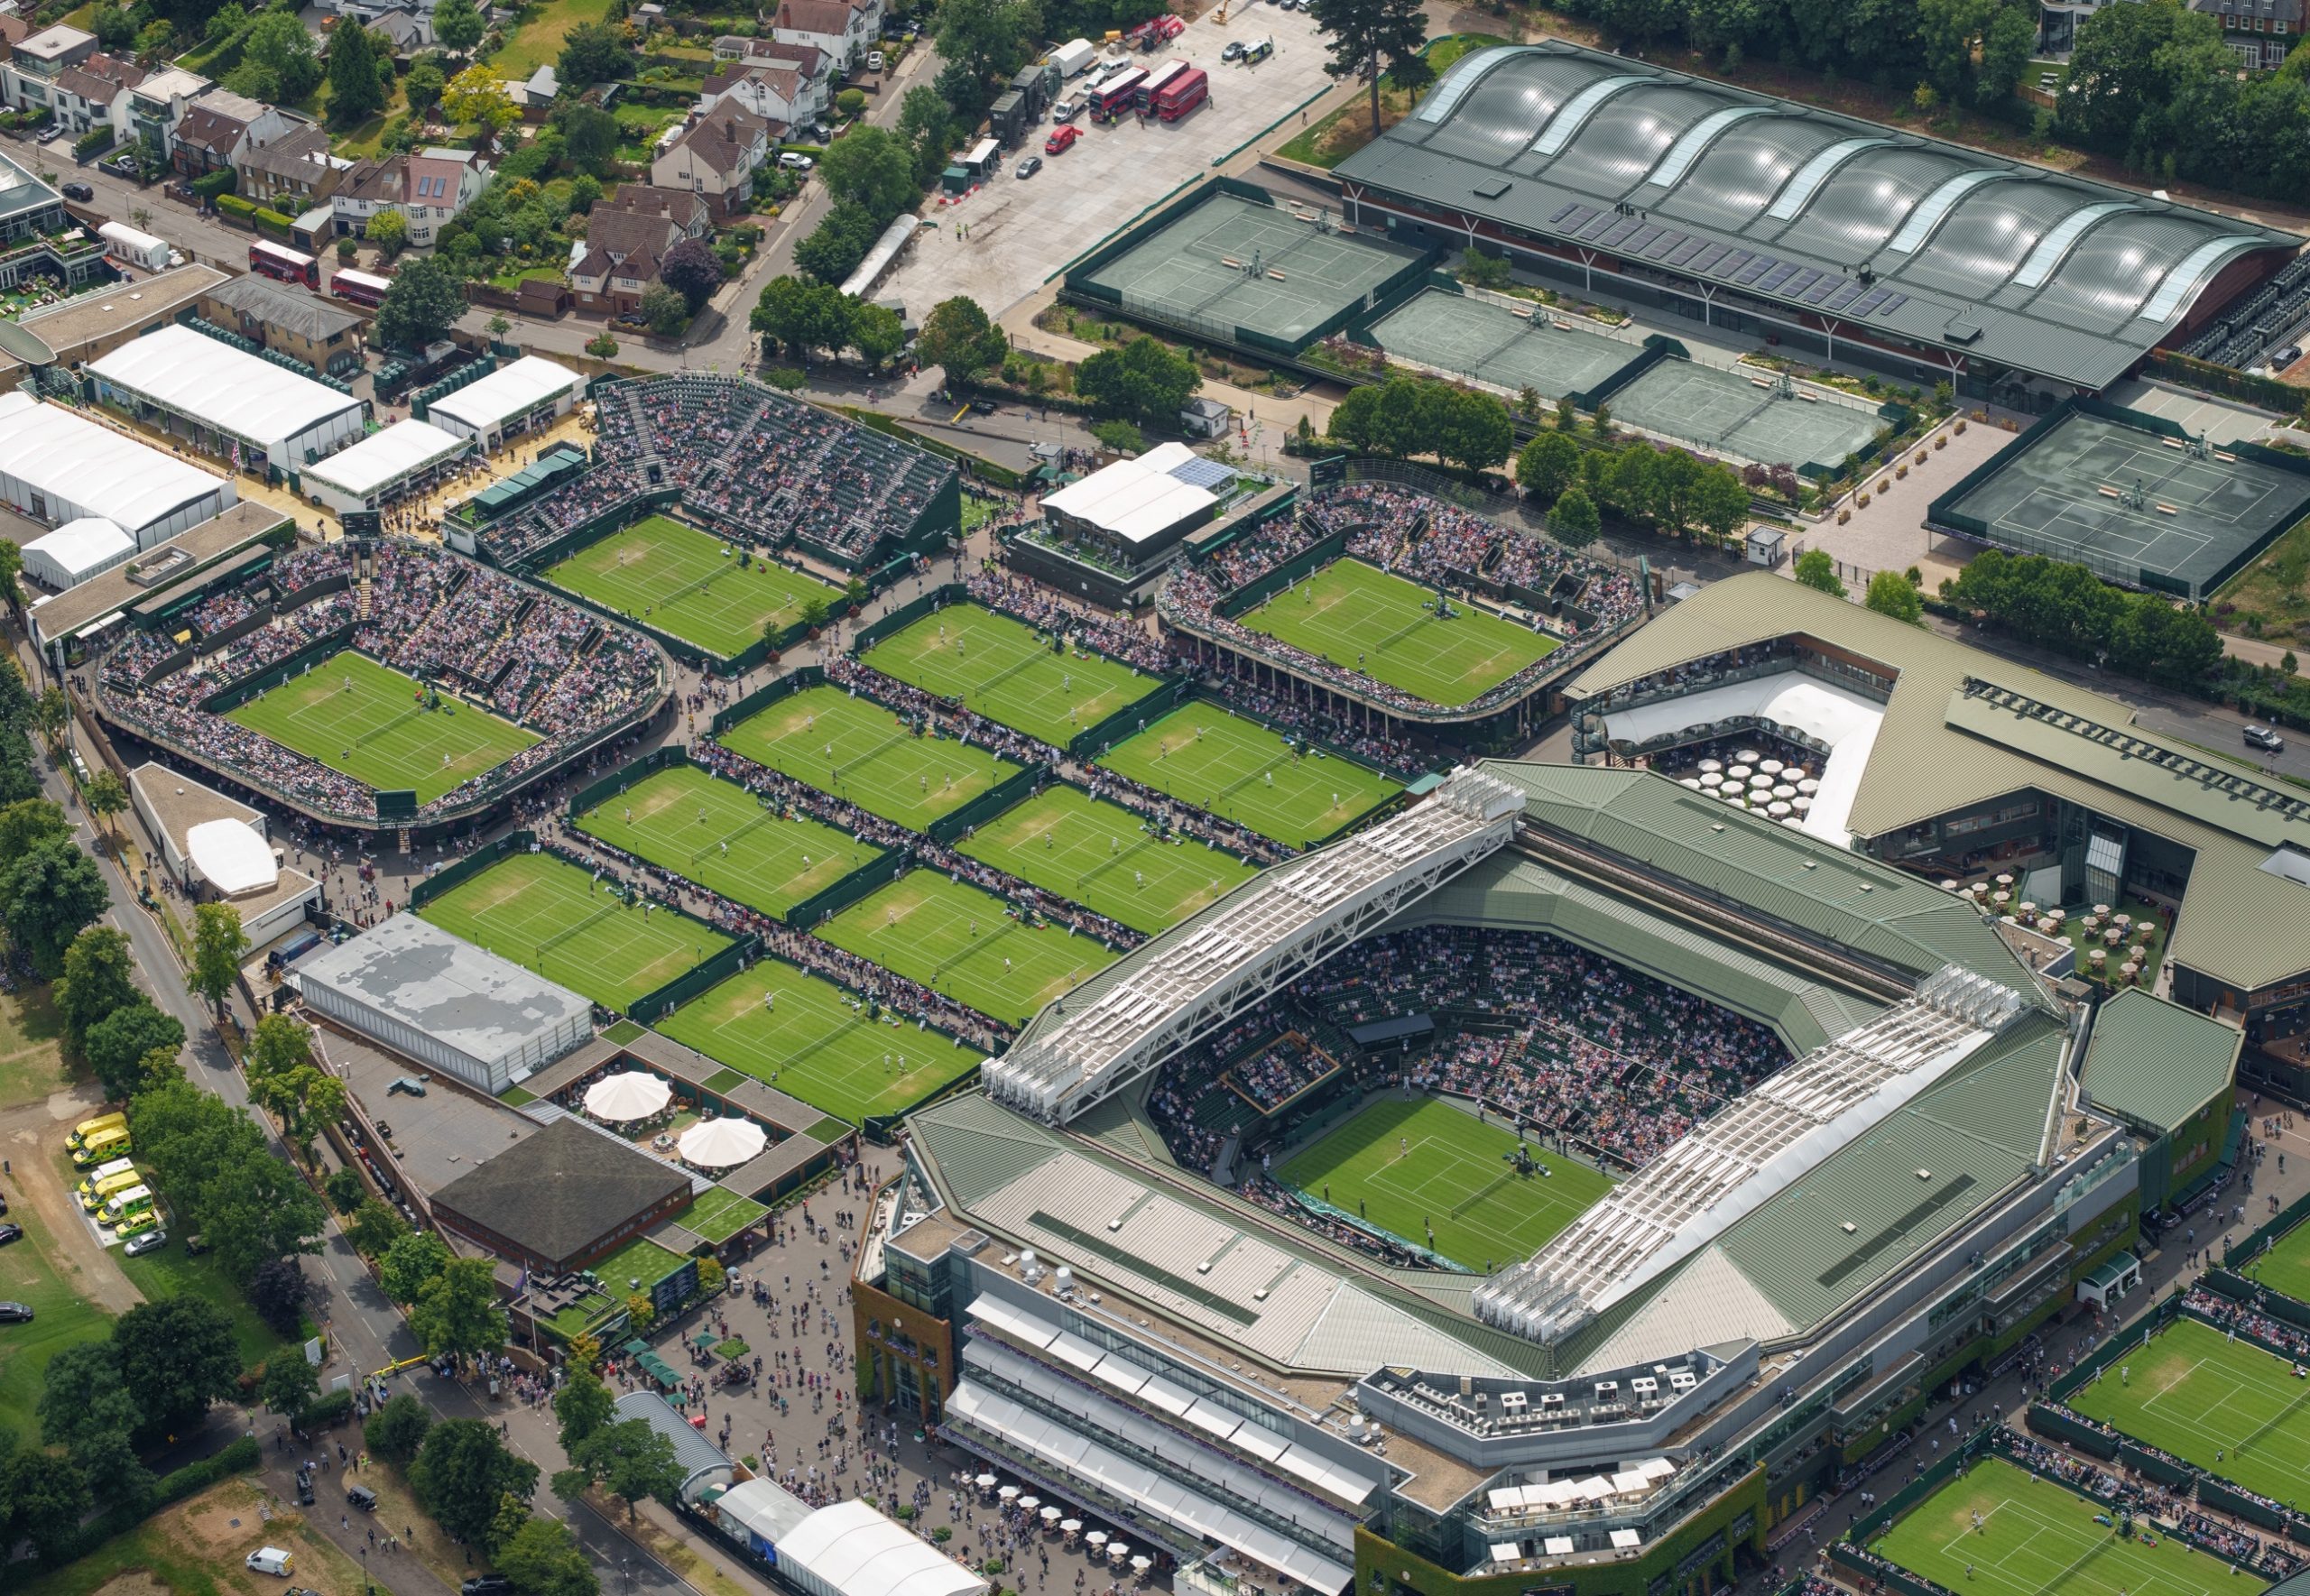 Aerial view of The All England Lawn Tennis and Croquet Club